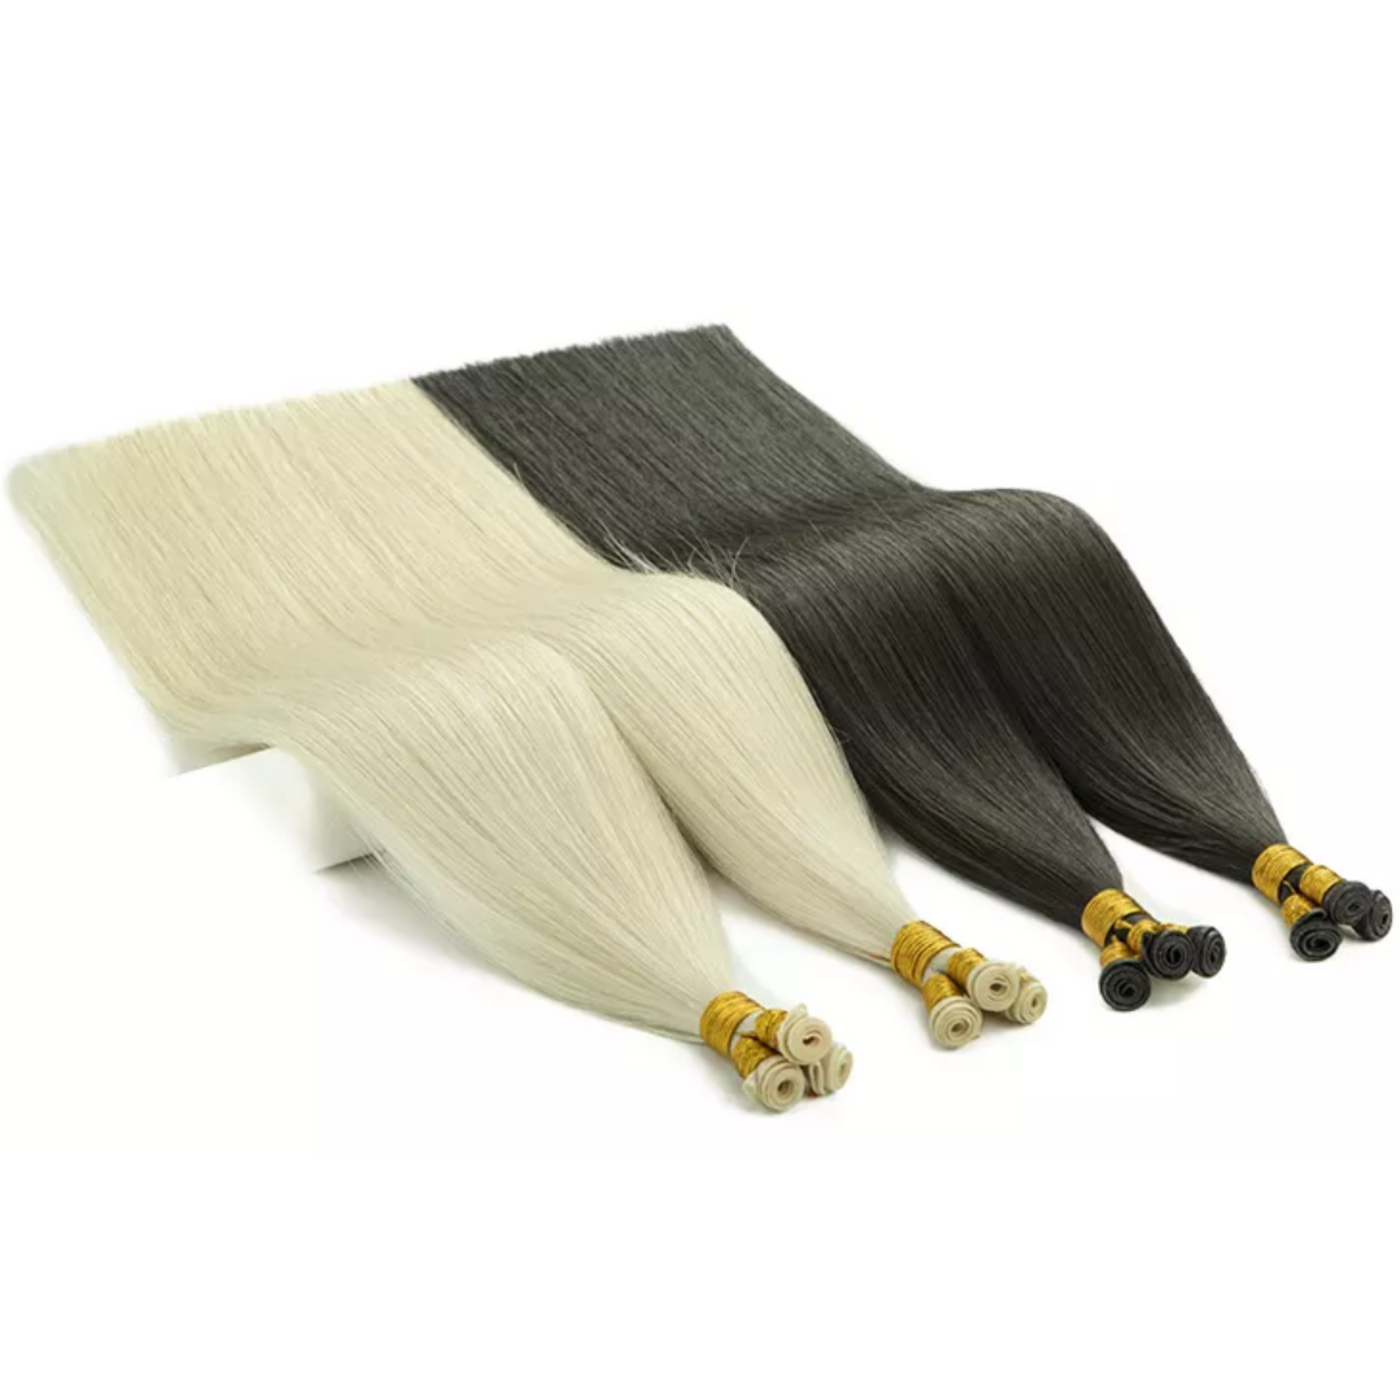 Discontinued Clutch Wefts (Practice Hair)